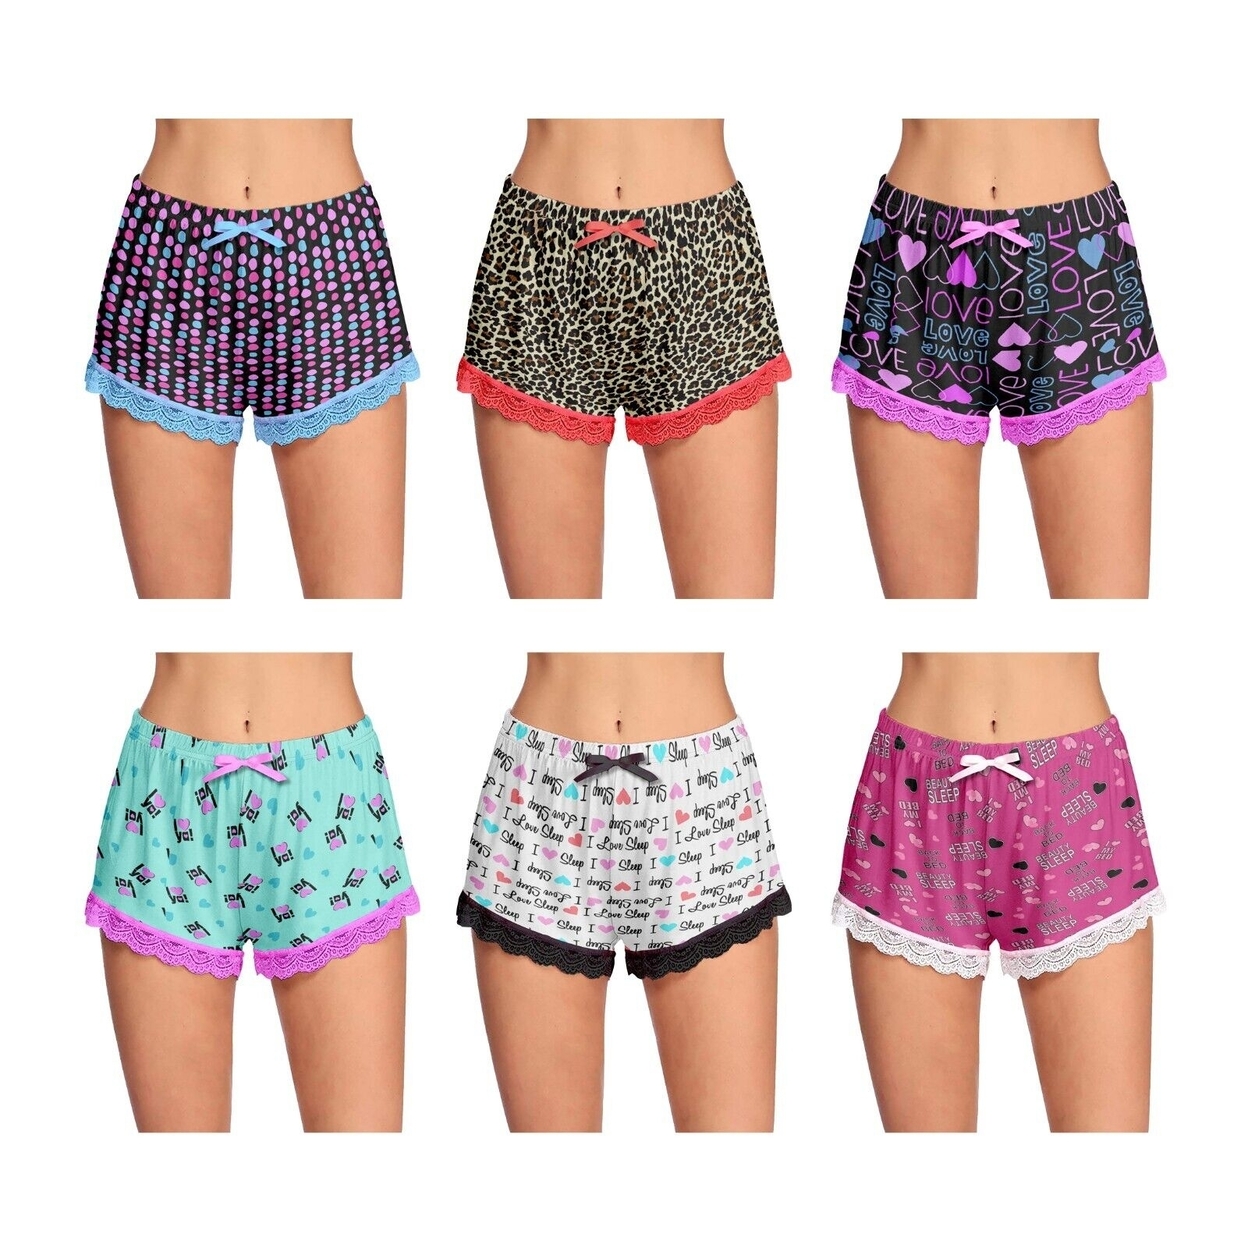 Multi-Pack: Women's Ultra-Soft Cozy Fun Printed Lace Trim Pajama Lounge Shorts - 1-pack, Large, Shapes